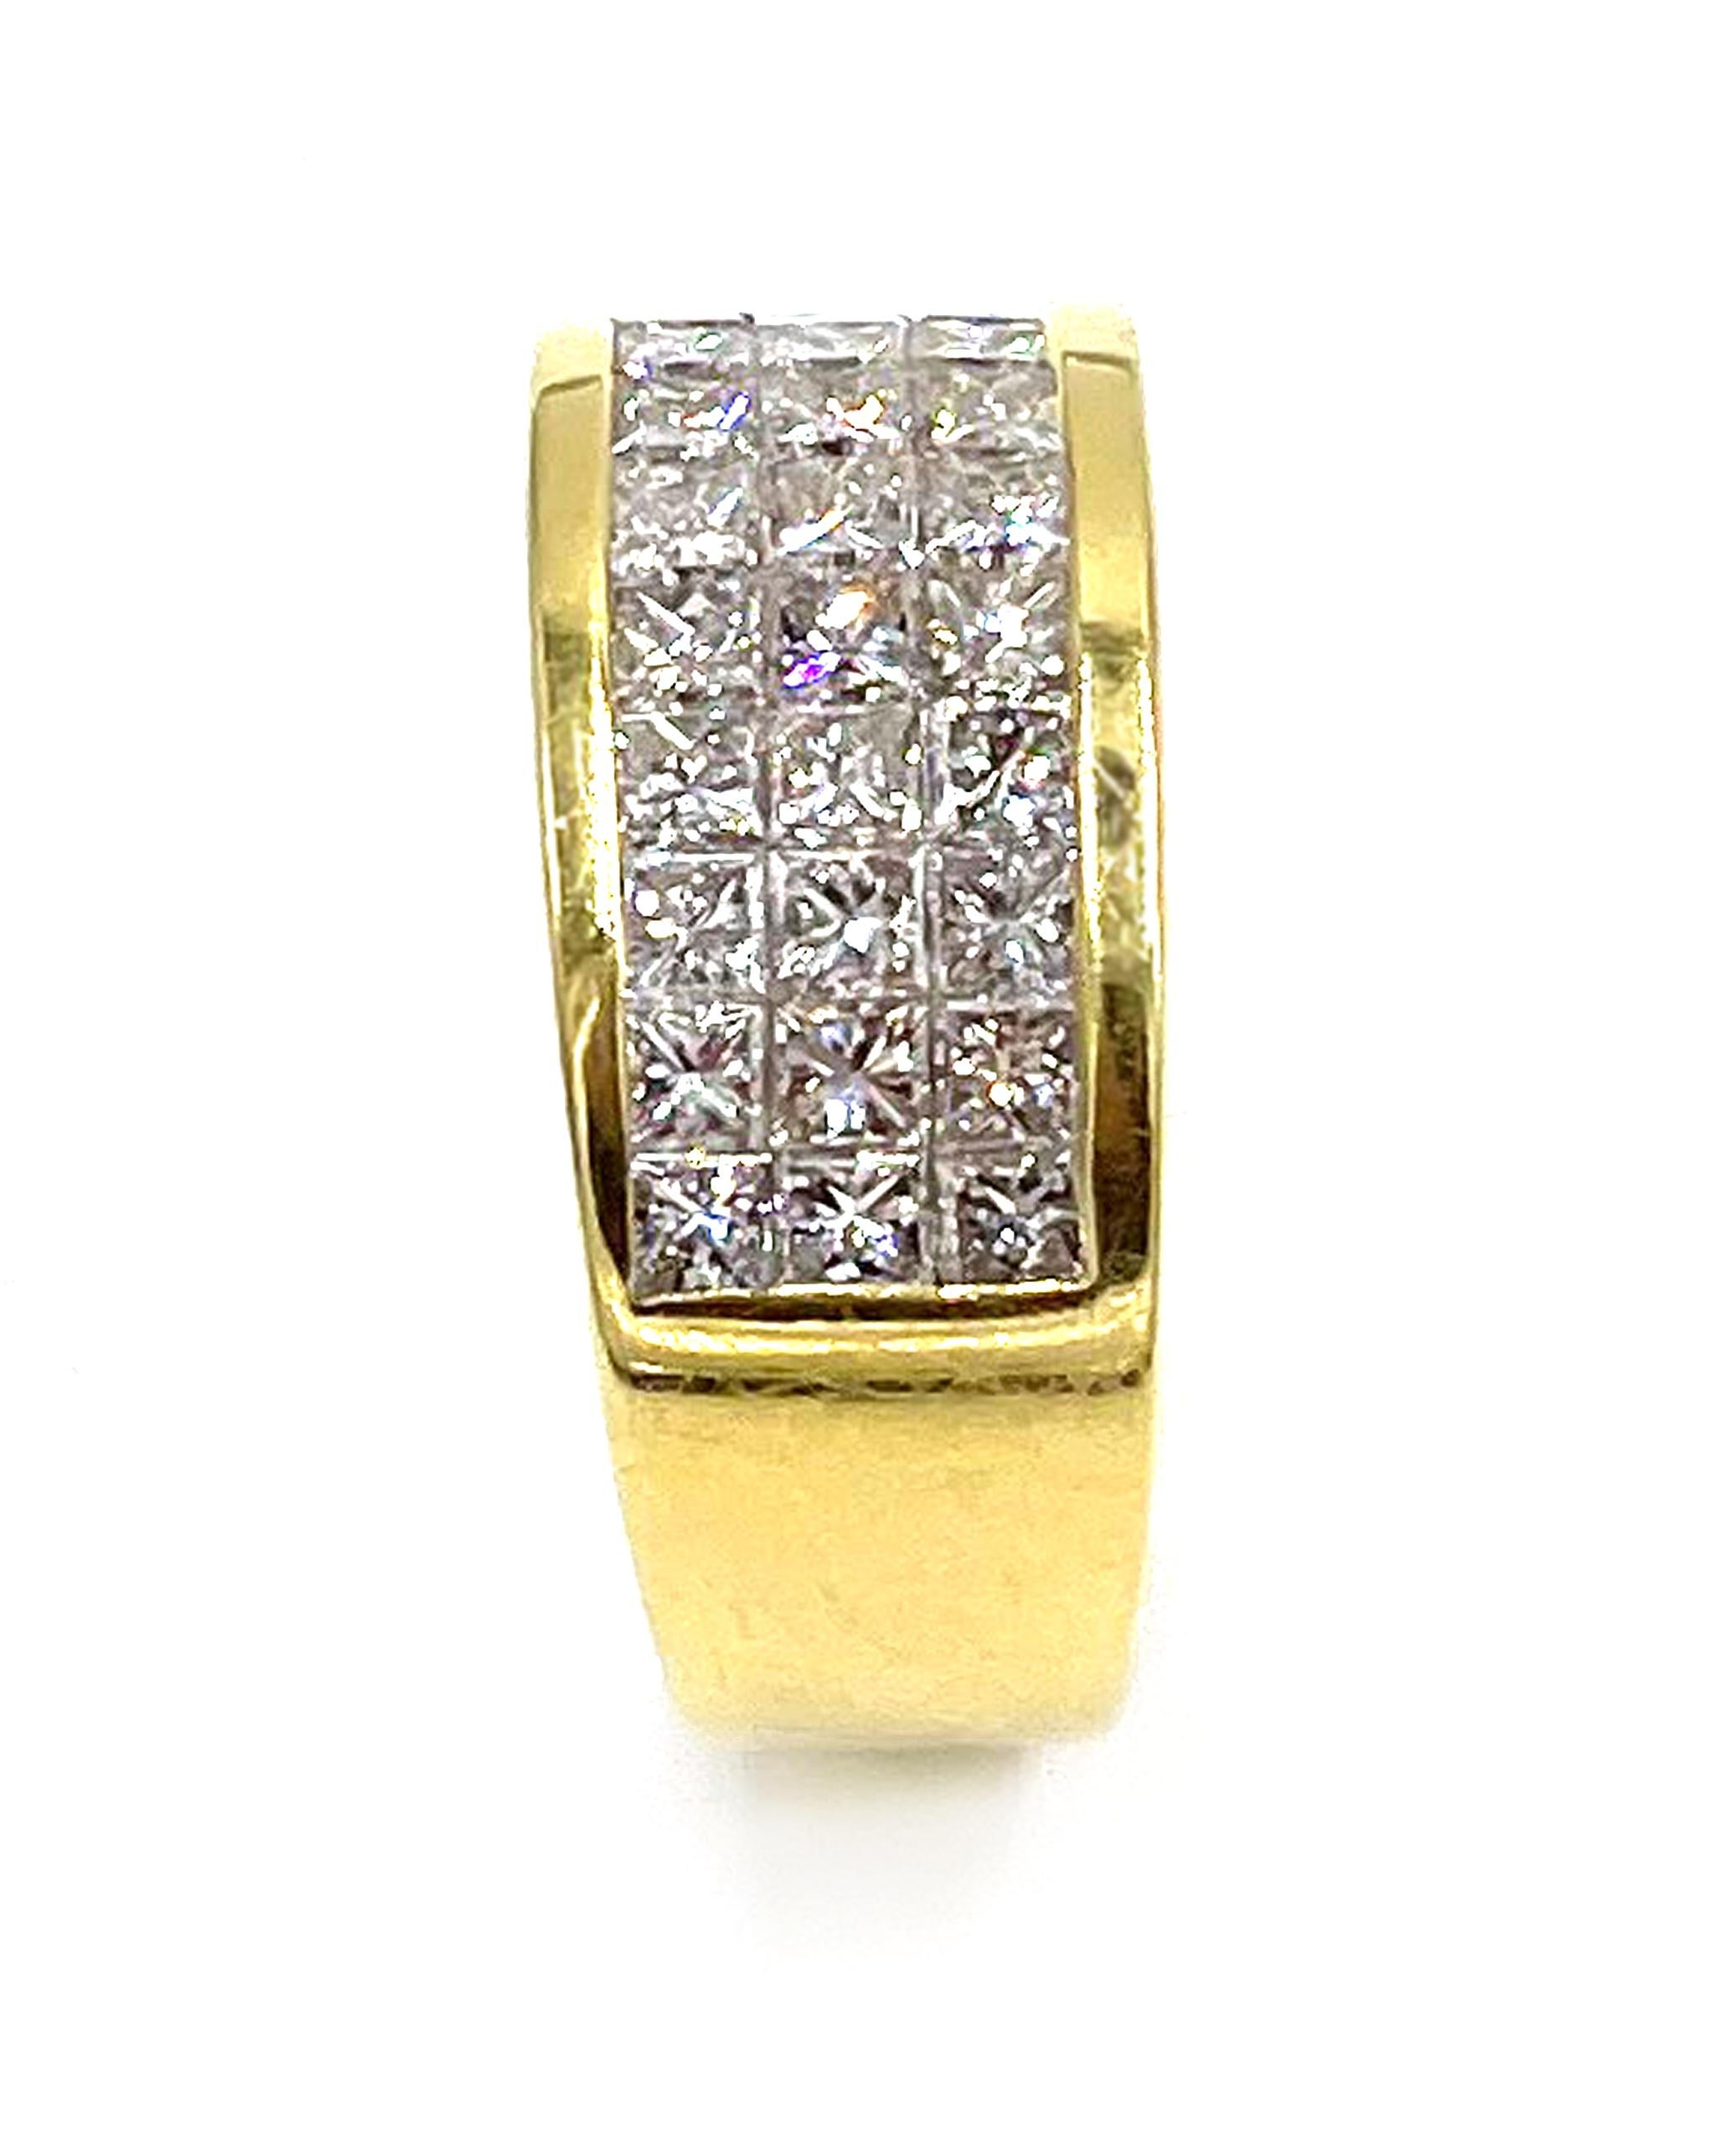 18K yellow gold ring with 3 rows of princess cut diamonds.  The 30 princess cut diamonds are invisibly set and weigh a total of 2.10 carats: G/H color, VS clarity.

-Circa 1995
-Finger size: 6.5